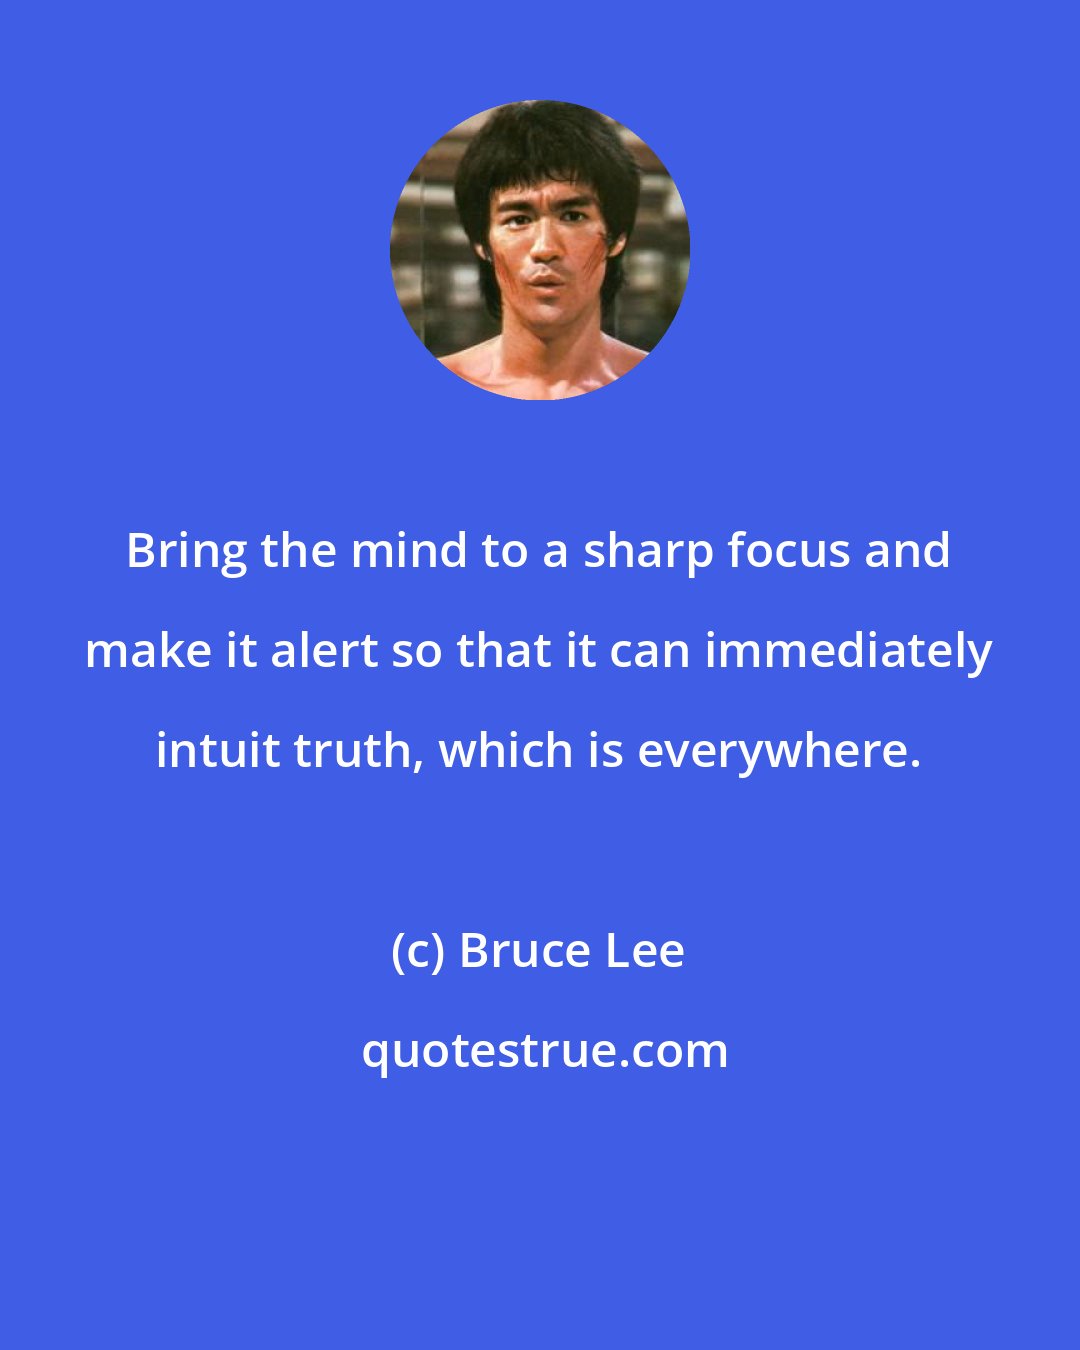 Bruce Lee: Bring the mind to a sharp focus and make it alert so that it can immediately intuit truth, which is everywhere.